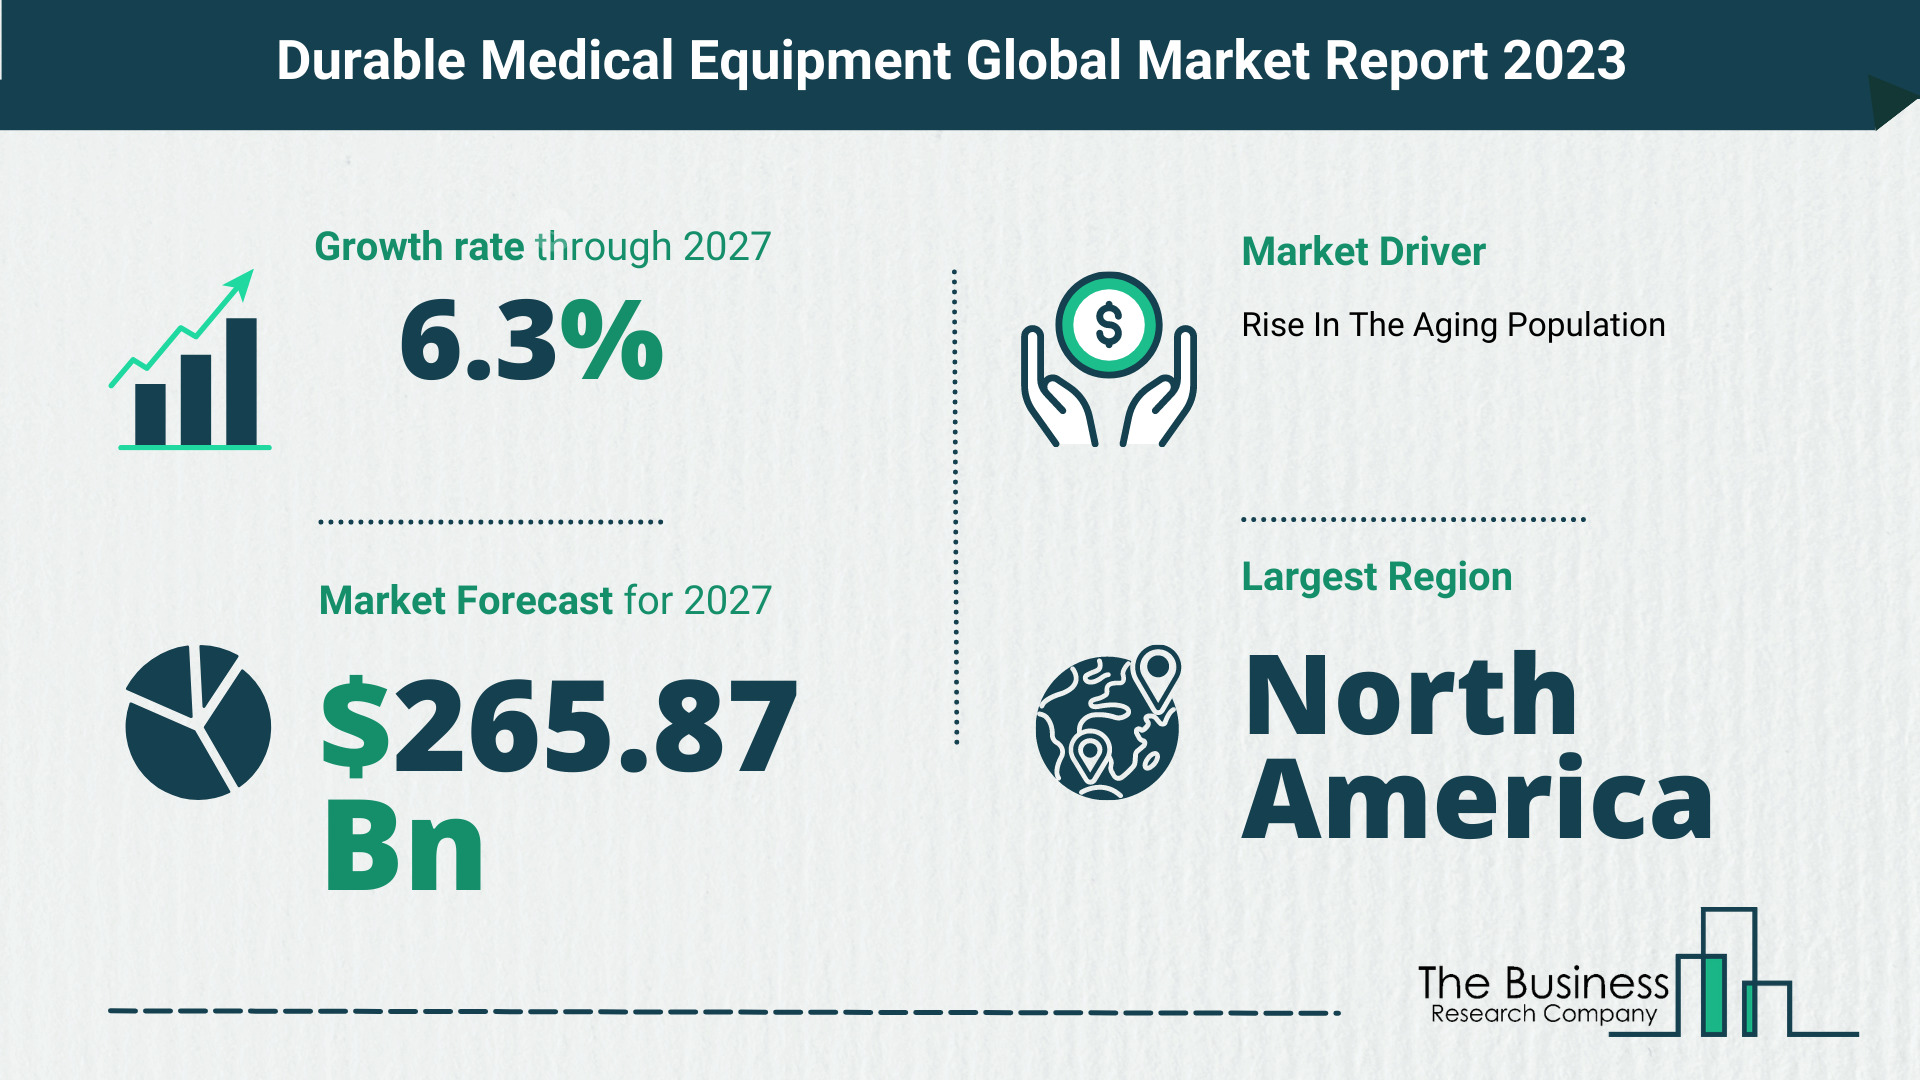 Durable Medical Equipment Market Size, Share, And Growth Rate Analysis 2023